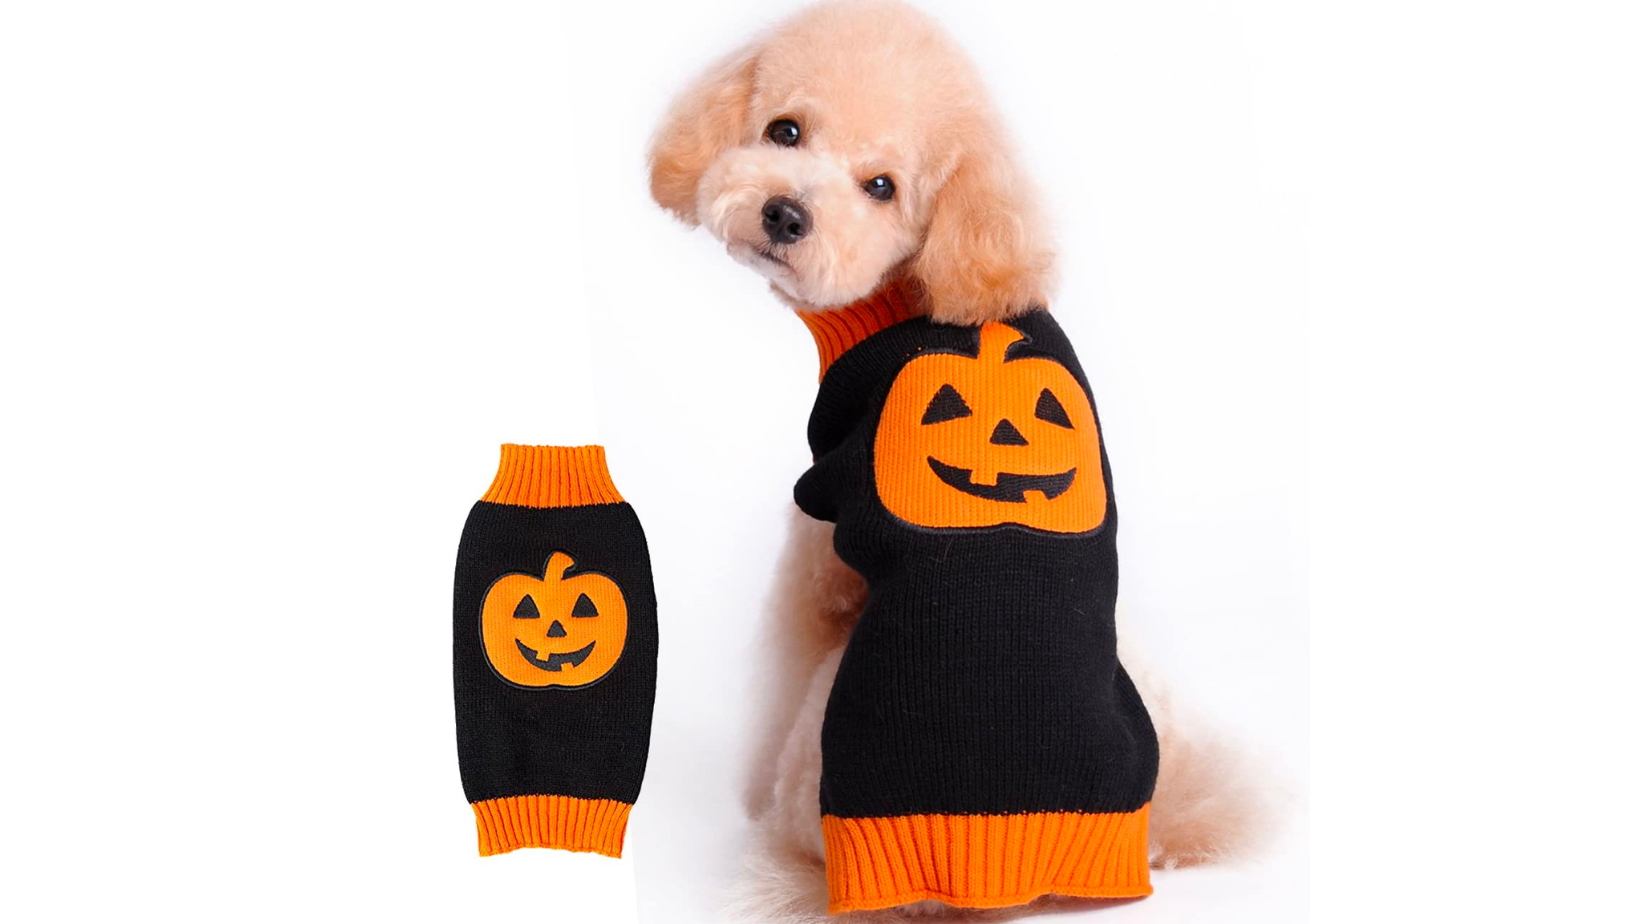 Halloween sweater for dogs with pumpkin model